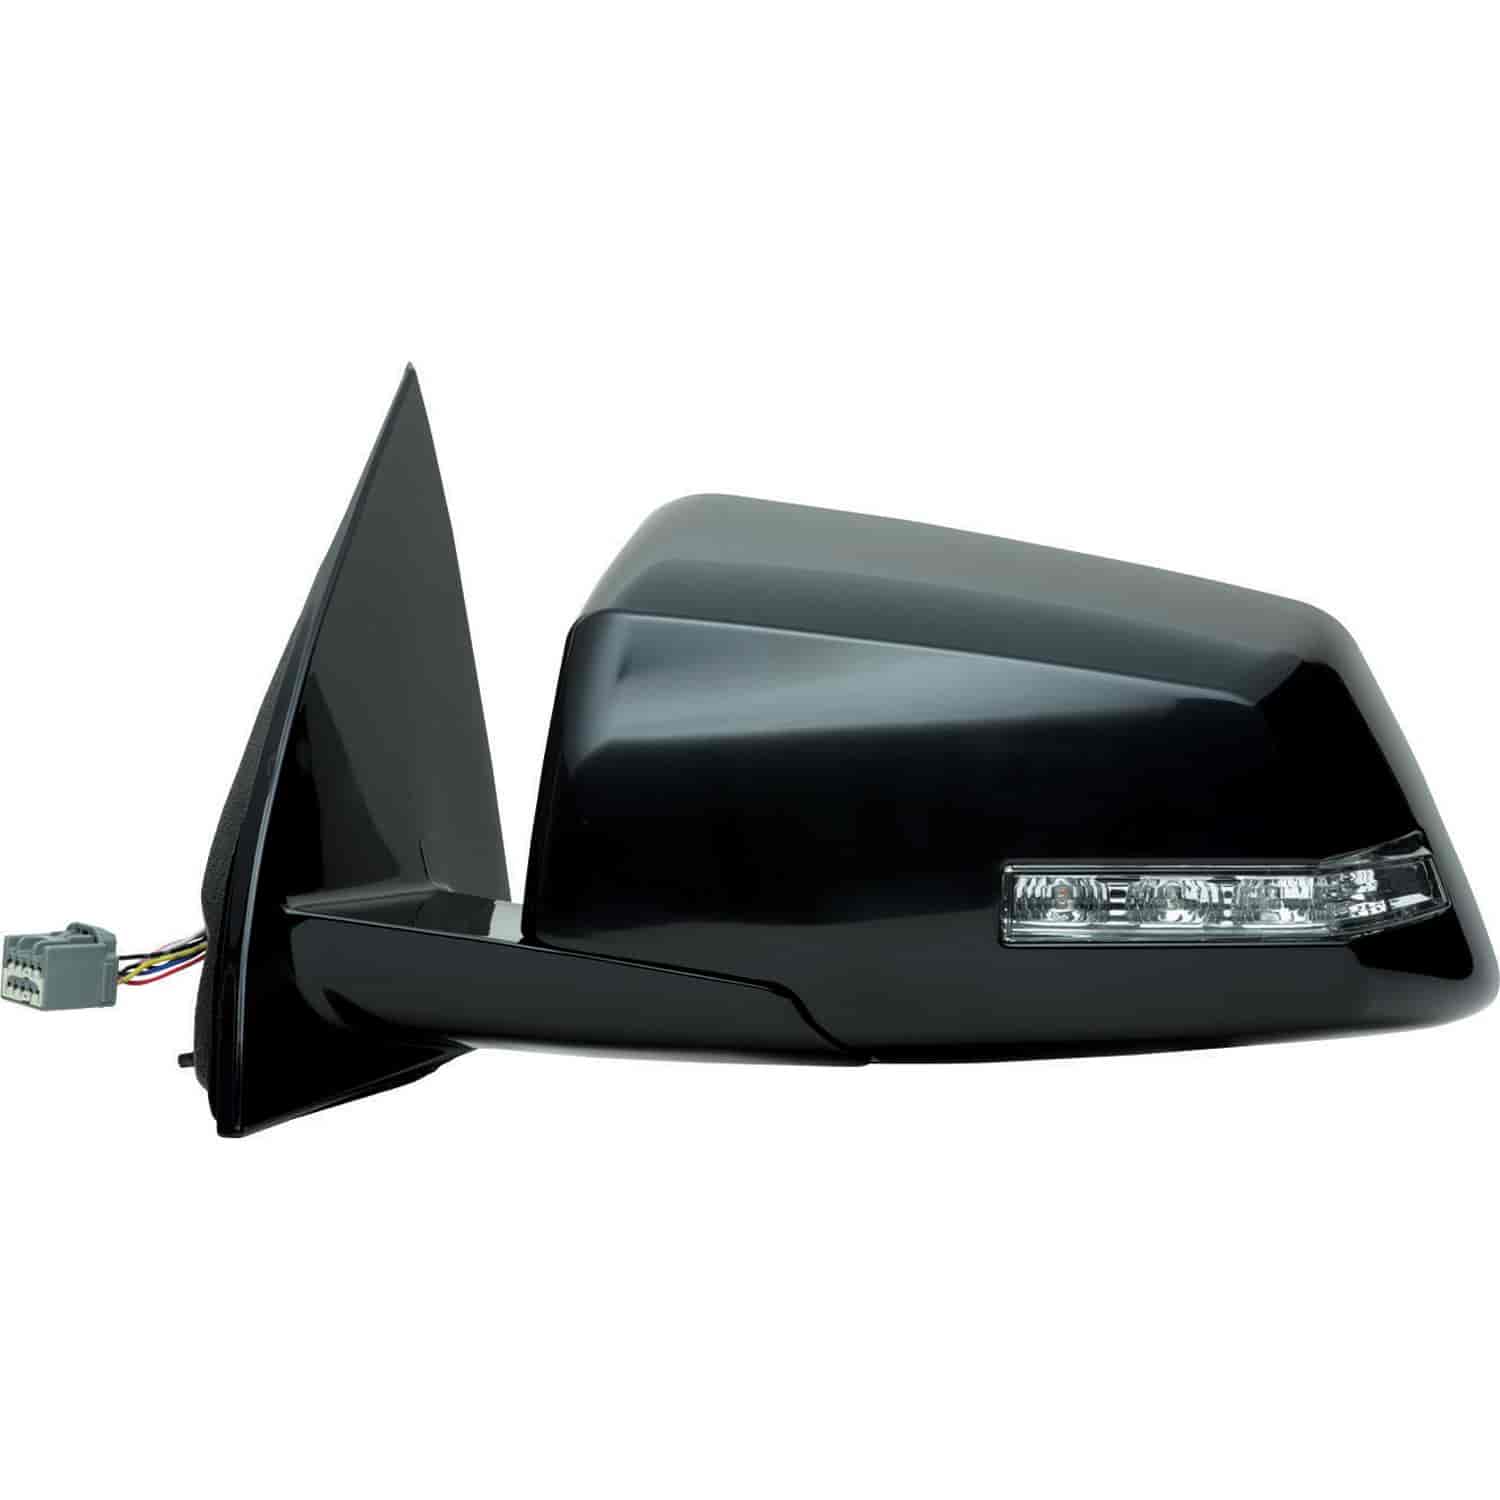 OEM Style Replacement mirror for 09-14 Traverse 07-10 Saturn Outlook 07-14 GMC Acadia driver side mi